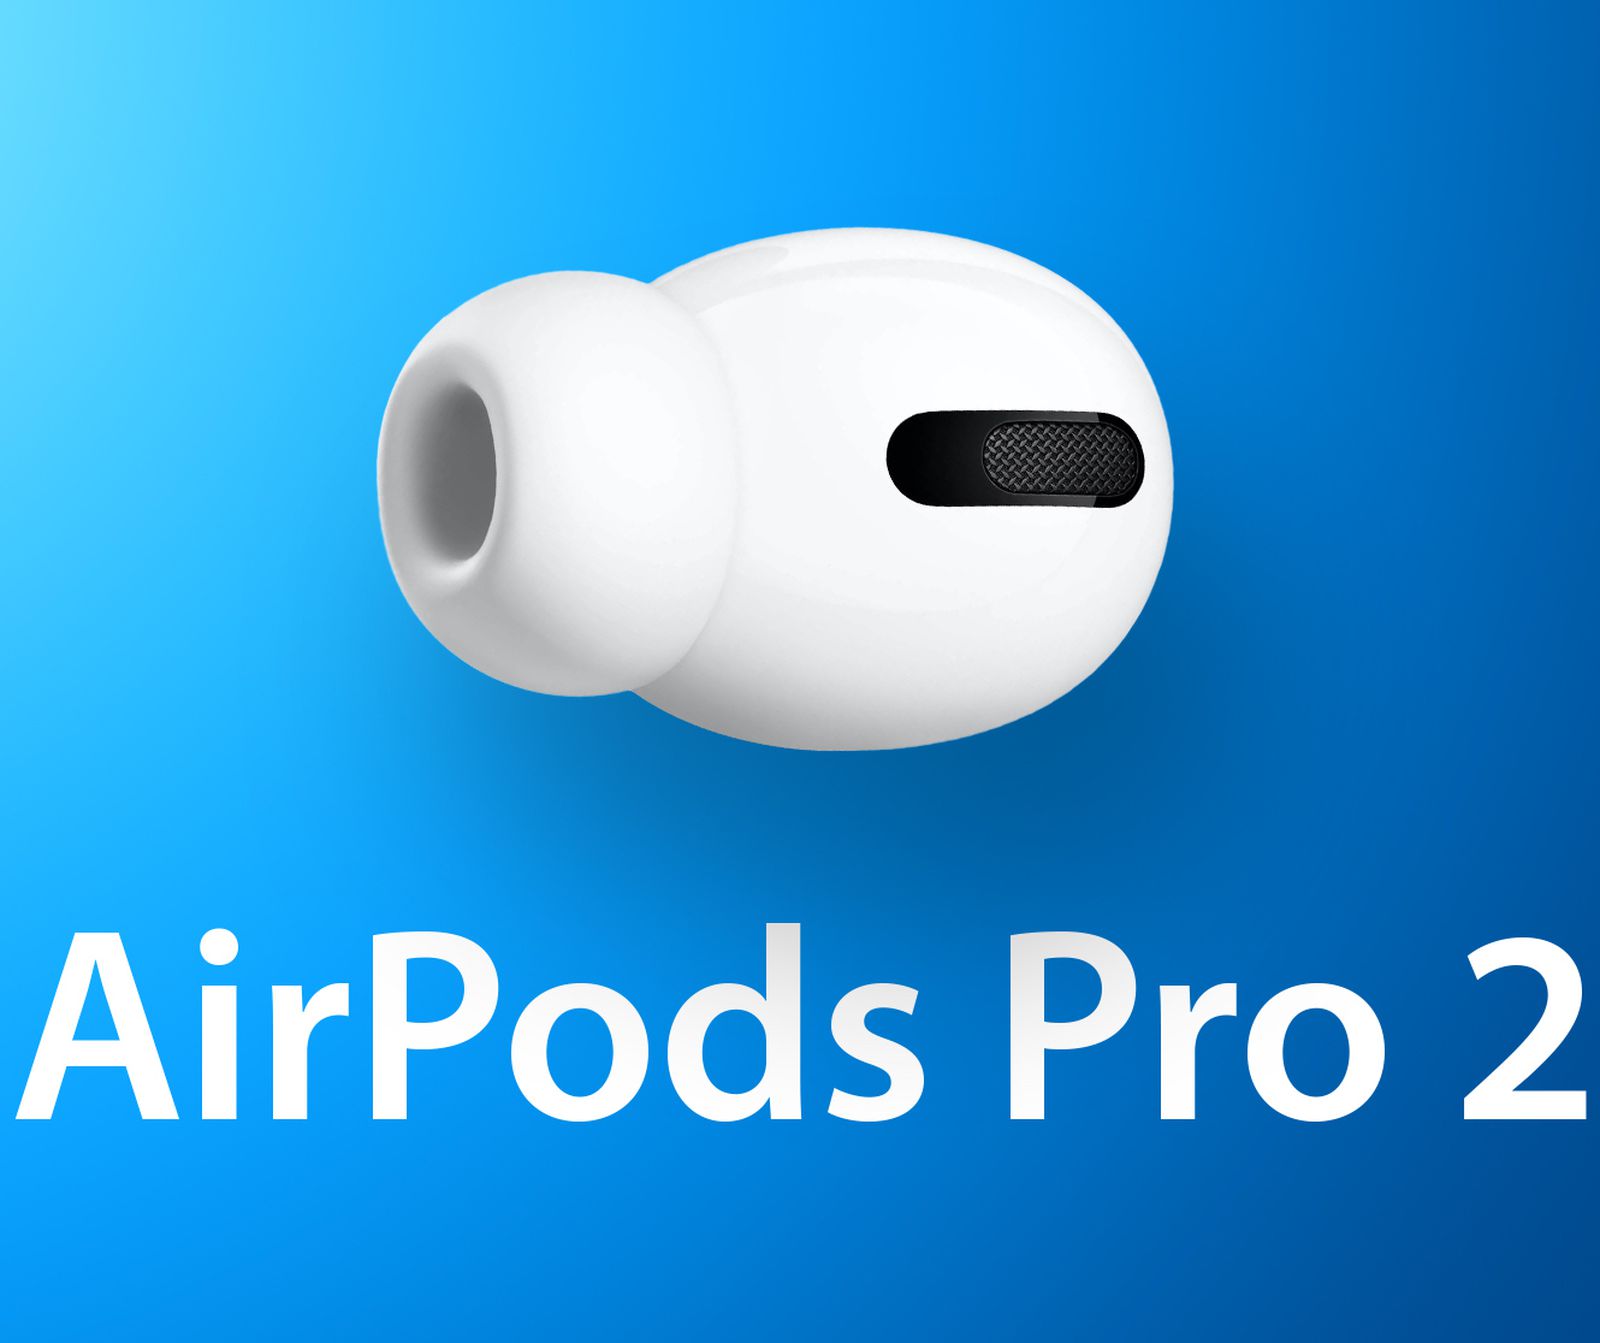 Rumor: AirPods Pro 2 to Launch in Third Quarter of 2022